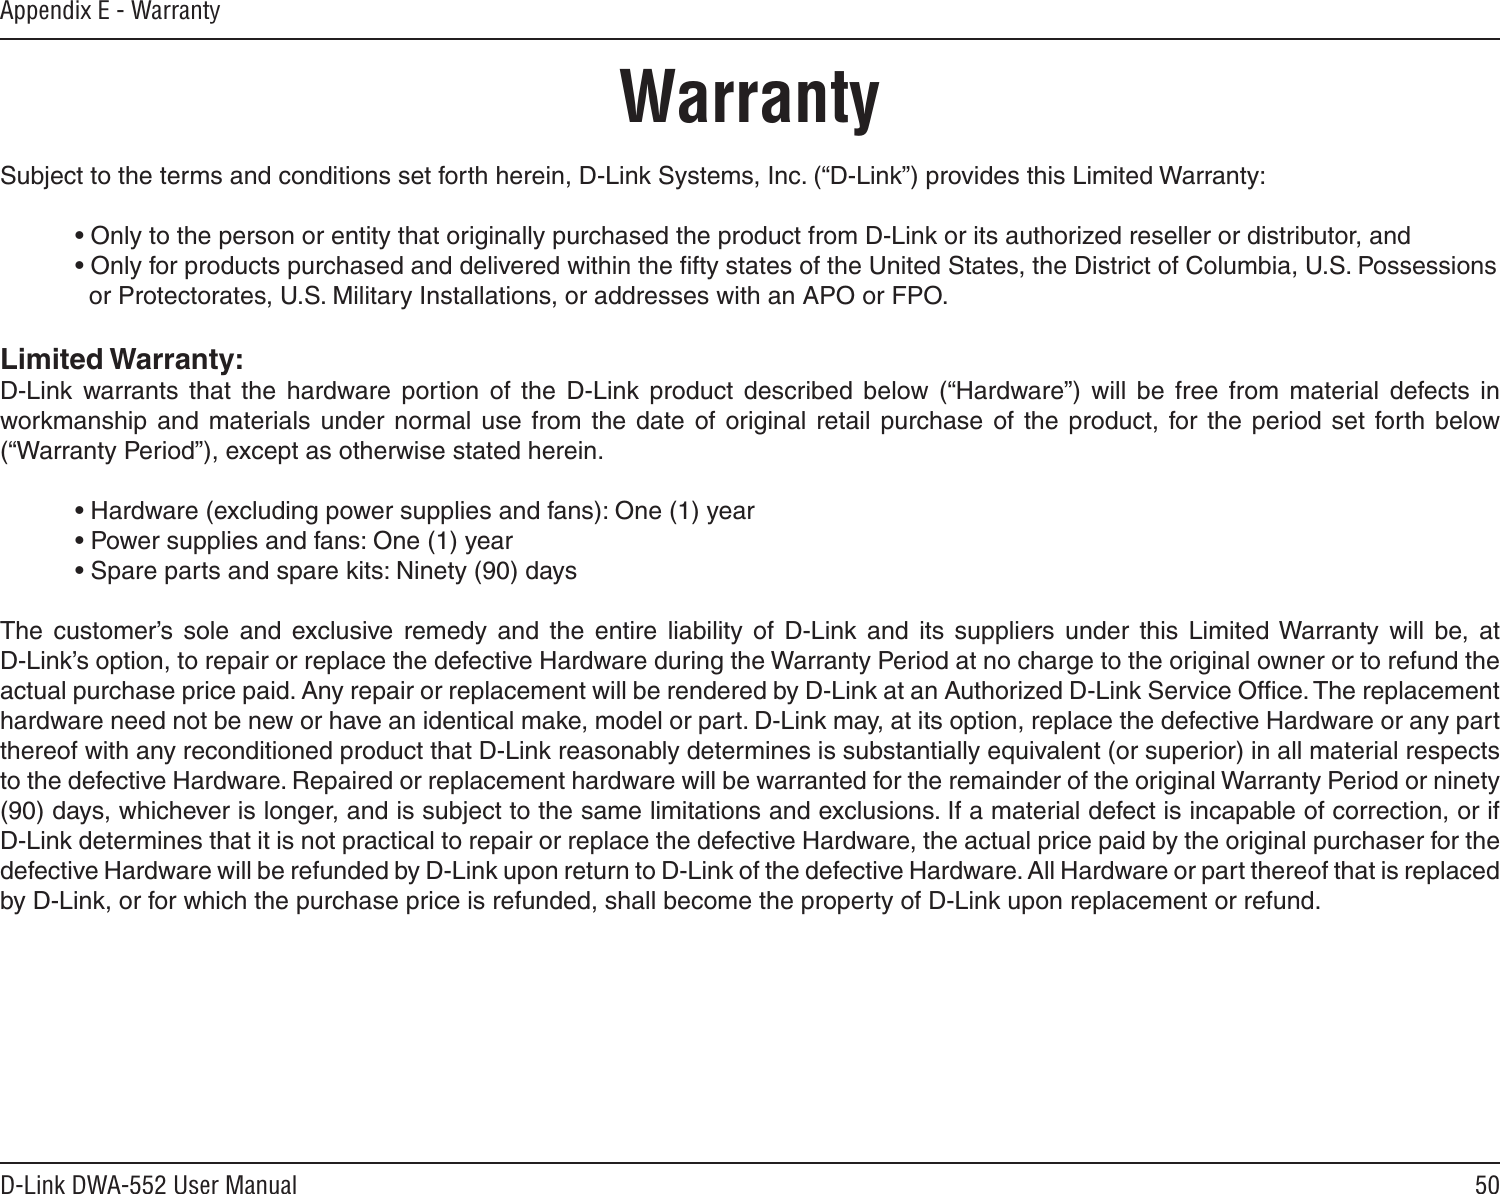 50D-Link DWA-552 User ManualAppendix E - WarrantyWarrantySubject to the terms and conditions set forth herein, D-Link Systems, Inc. (“D-Link”) provides this Limited Warranty:  • Only to the person or entity that originally purchased the product from D-Link or its authorized reseller or distributor, and  • Only for products purchased and delivered within the ﬁfty states of the United States, the District of Columbia, U.S. Possessions      or Protectorates, U.S. Military Installations, or addresses with an APO or FPO.Limited Warranty:D-Link  warrants that  the  hardware  portion  of  the  D-Link  product  described  below  (“Hardware”)  will  be  free  from  material  defects  in workmanship  and  materials  under  normal  use  from  the  date of  original  retail purchase  of  the  product,  for  the  period set  forth below (“Warranty Period”), except as otherwise stated herein.  • Hardware (excluding power supplies and fans): One (1) year  • Power supplies and fans: One (1) year  • Spare parts and spare kits: Ninety (90) daysThe  customer’s  sole  and  exclusive  remedy  and  the  entire  liability  of  D-Link  and  its  suppliers  under  this  Limited Warranty  will  be,  at  D-Link’s option, to repair or replace the defective Hardware during the Warranty Period at no charge to the original owner or to refund the actual purchase price paid. Any repair or replacement will be rendered by D-Link at an Authorized D-Link Service Ofﬁce. The replacement hardware need not be new or have an identical make, model or part. D-Link may, at its option, replace the defective Hardware or any part thereof with any reconditioned product that D-Link reasonably determines is substantially equivalent (or superior) in all material respects to the defective Hardware. Repaired or replacement hardware will be warranted for the remainder of the original Warranty Period or ninety (90) days, whichever is longer, and is subject to the same limitations and exclusions. If a material defect is incapable of correction, or if D-Link determines that it is not practical to repair or replace the defective Hardware, the actual price paid by the original purchaser for the defective Hardware will be refunded by D-Link upon return to D-Link of the defective Hardware. All Hardware or part thereof that is replaced by D-Link, or for which the purchase price is refunded, shall become the property of D-Link upon replacement or refund.